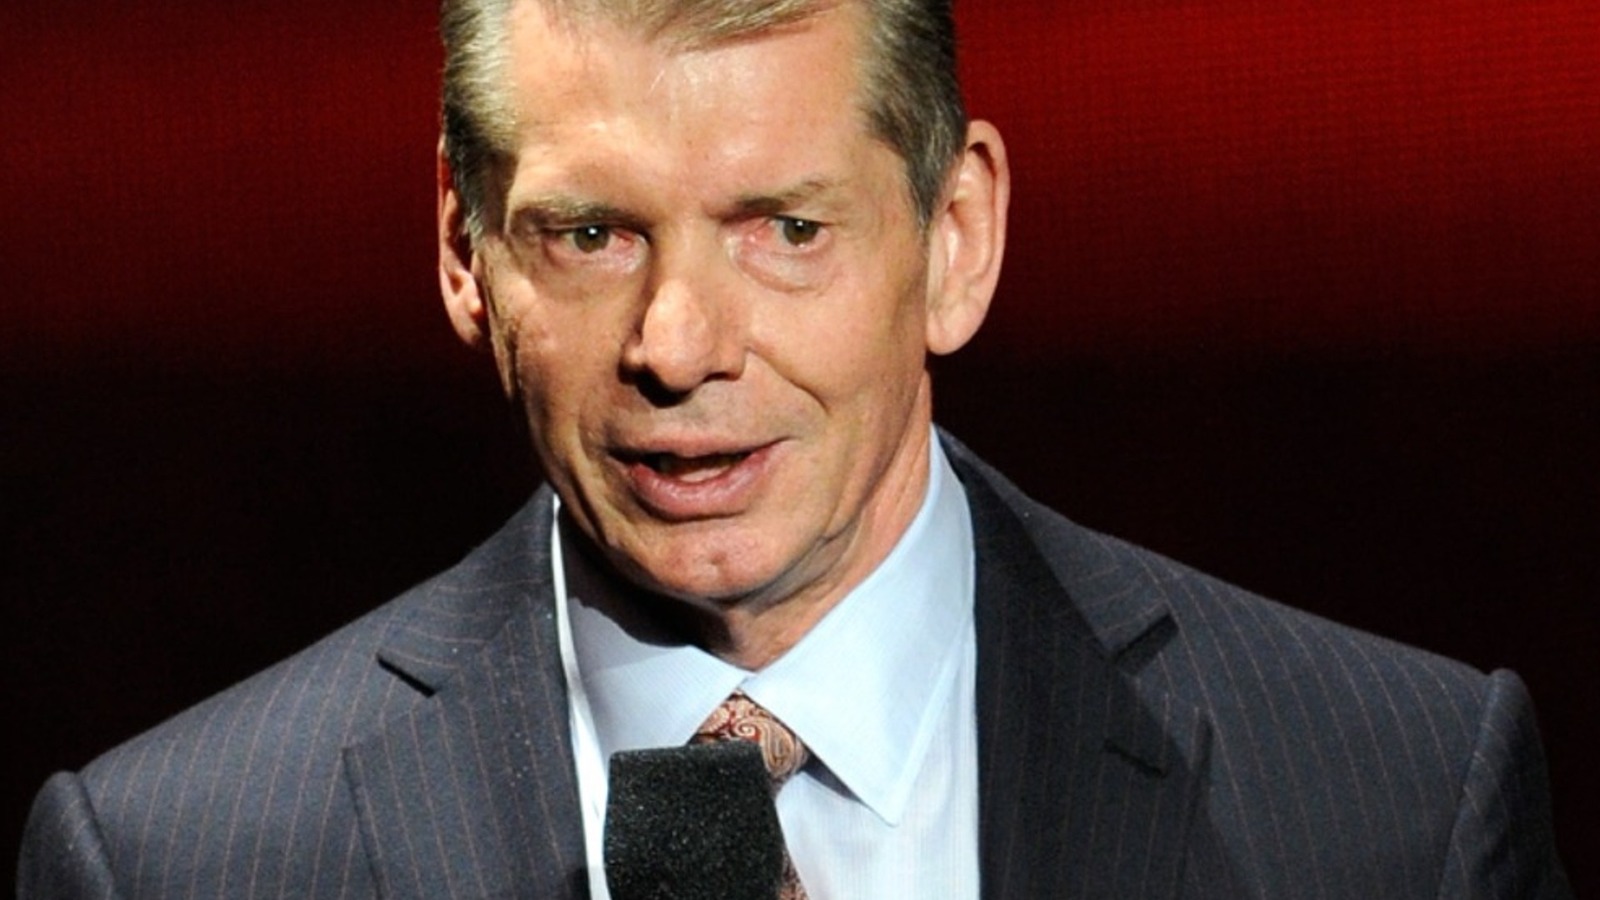 Report: Janel Grant Wrote Ex-WWE Boss Vince McMahon Love Letter, Says She Was Coerced